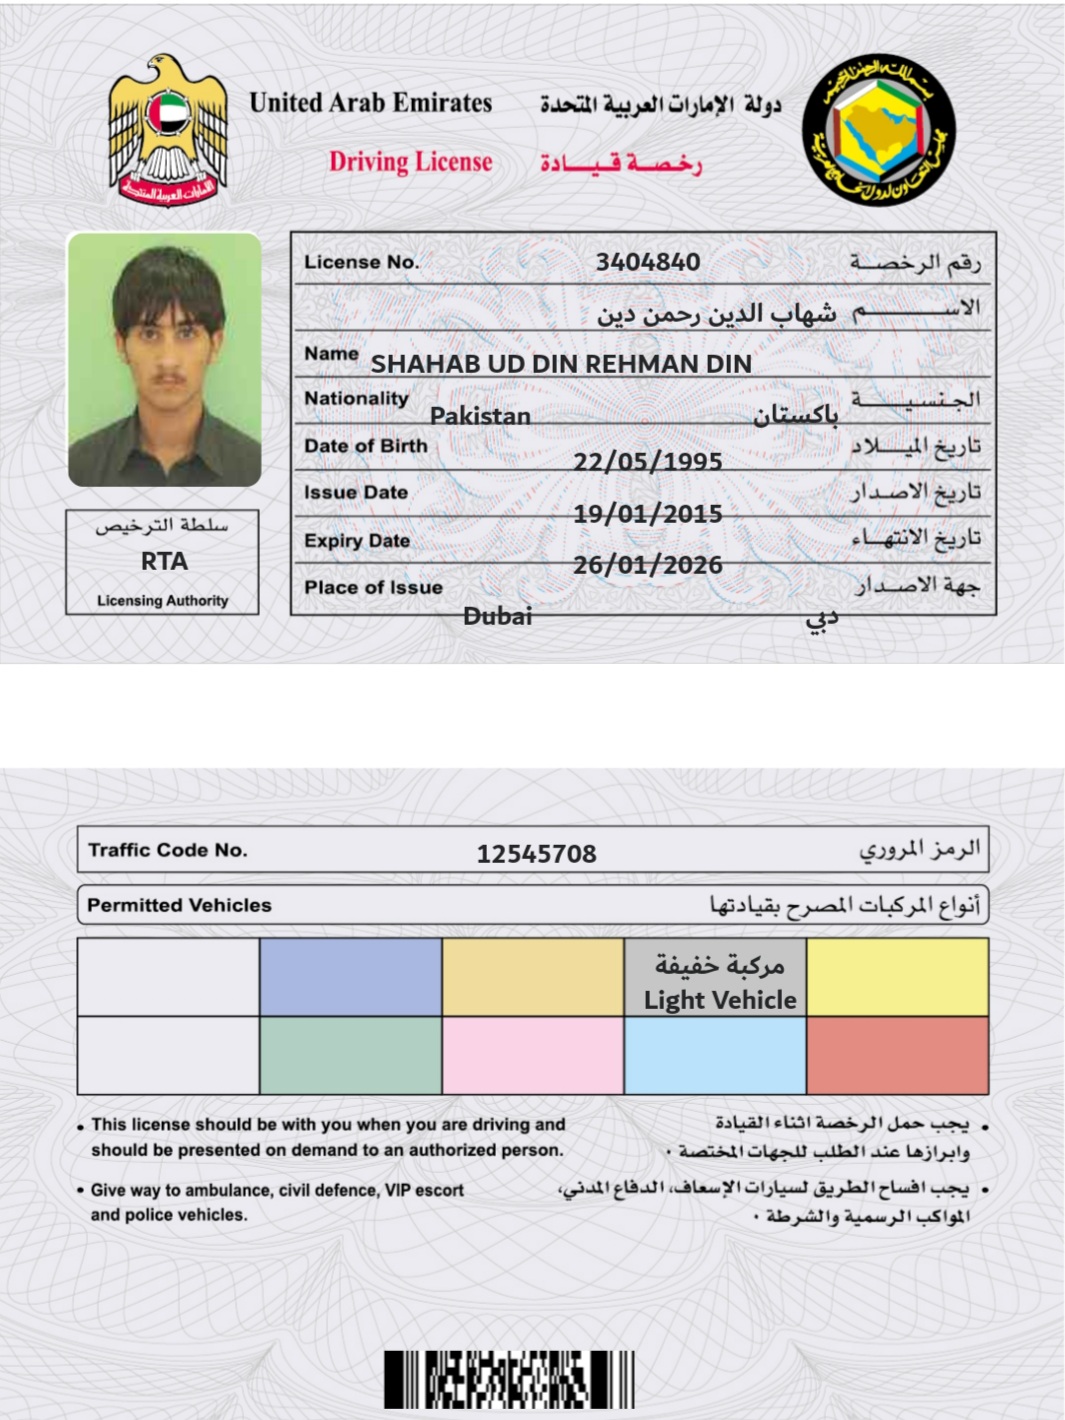 United Arab Emirates ui do ali Syle¥! dys

Driving License ~~ 3sl—d das,

   

License No.

 

023 582) oll Dla oe!
Name SHAHAB UD DIN REHMAN DIN

 

 

 

 

 

 

 

Nationality
Date of Birth

Issue Date

hal Ad Expiry Date
RTA aes
Dieting Ay Place of Issue Ak 2S J &gt;
Traffic Code No. 12545708 $298! Sal
Permitted Vehicles 530s 7 pall LS 1 gli

 

  
   
 

 

  

Sh
Vehicle

 

« This license should be with you when you are driving and Balaal LS) dead JJ) Jas cas 0
should be presented on demand to an authorized person. + Aaland! Slgal) callal! wie Lajiuly
+ Give way to ambulance, civil defence, VIP escort (al! pI la YS sles) 3a pad plead! cms ©

and police vehicles.

Ao 2g Ruan 31 SIs

Hike ||